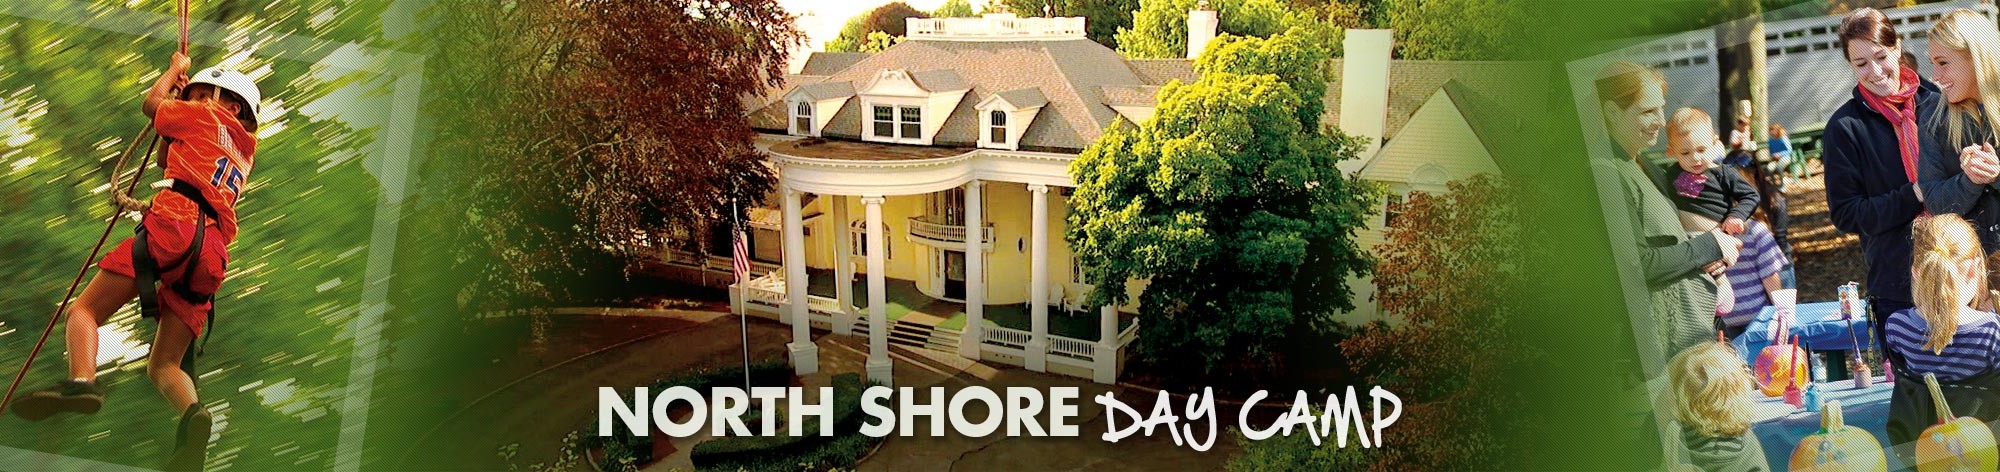 Events at North Shore Day Camp